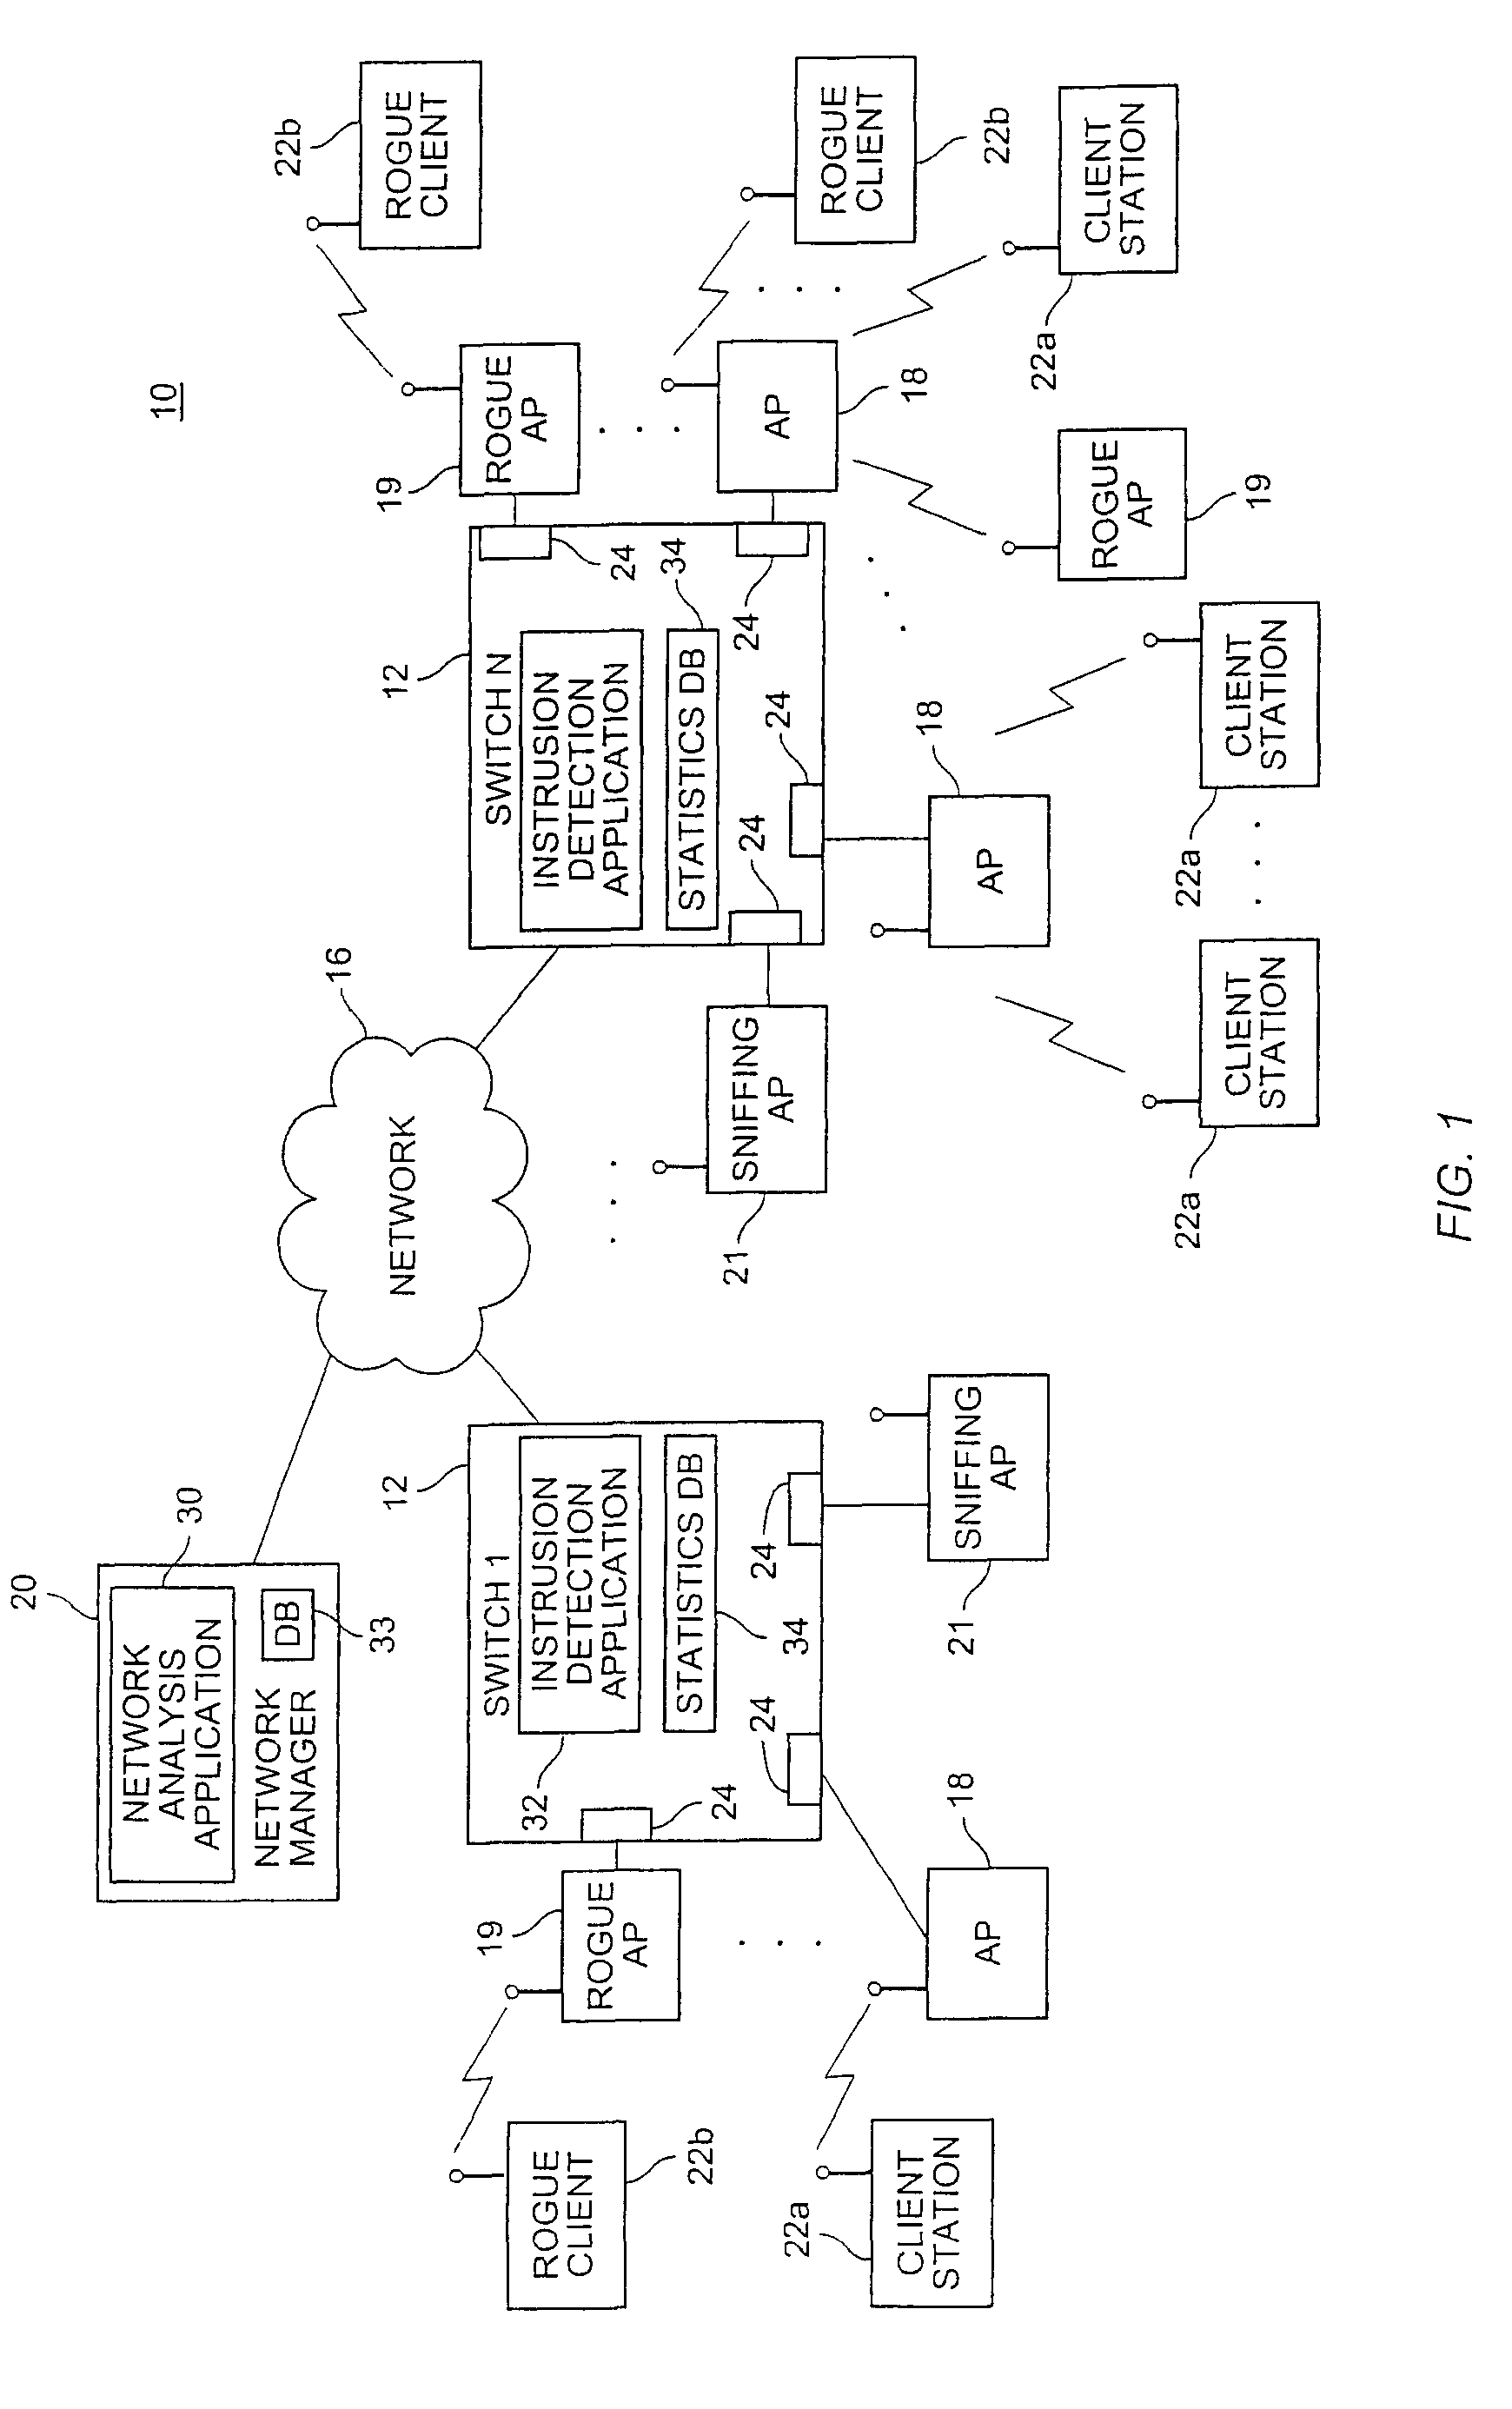 Method and system for detecting and preventing access intrusion in a network